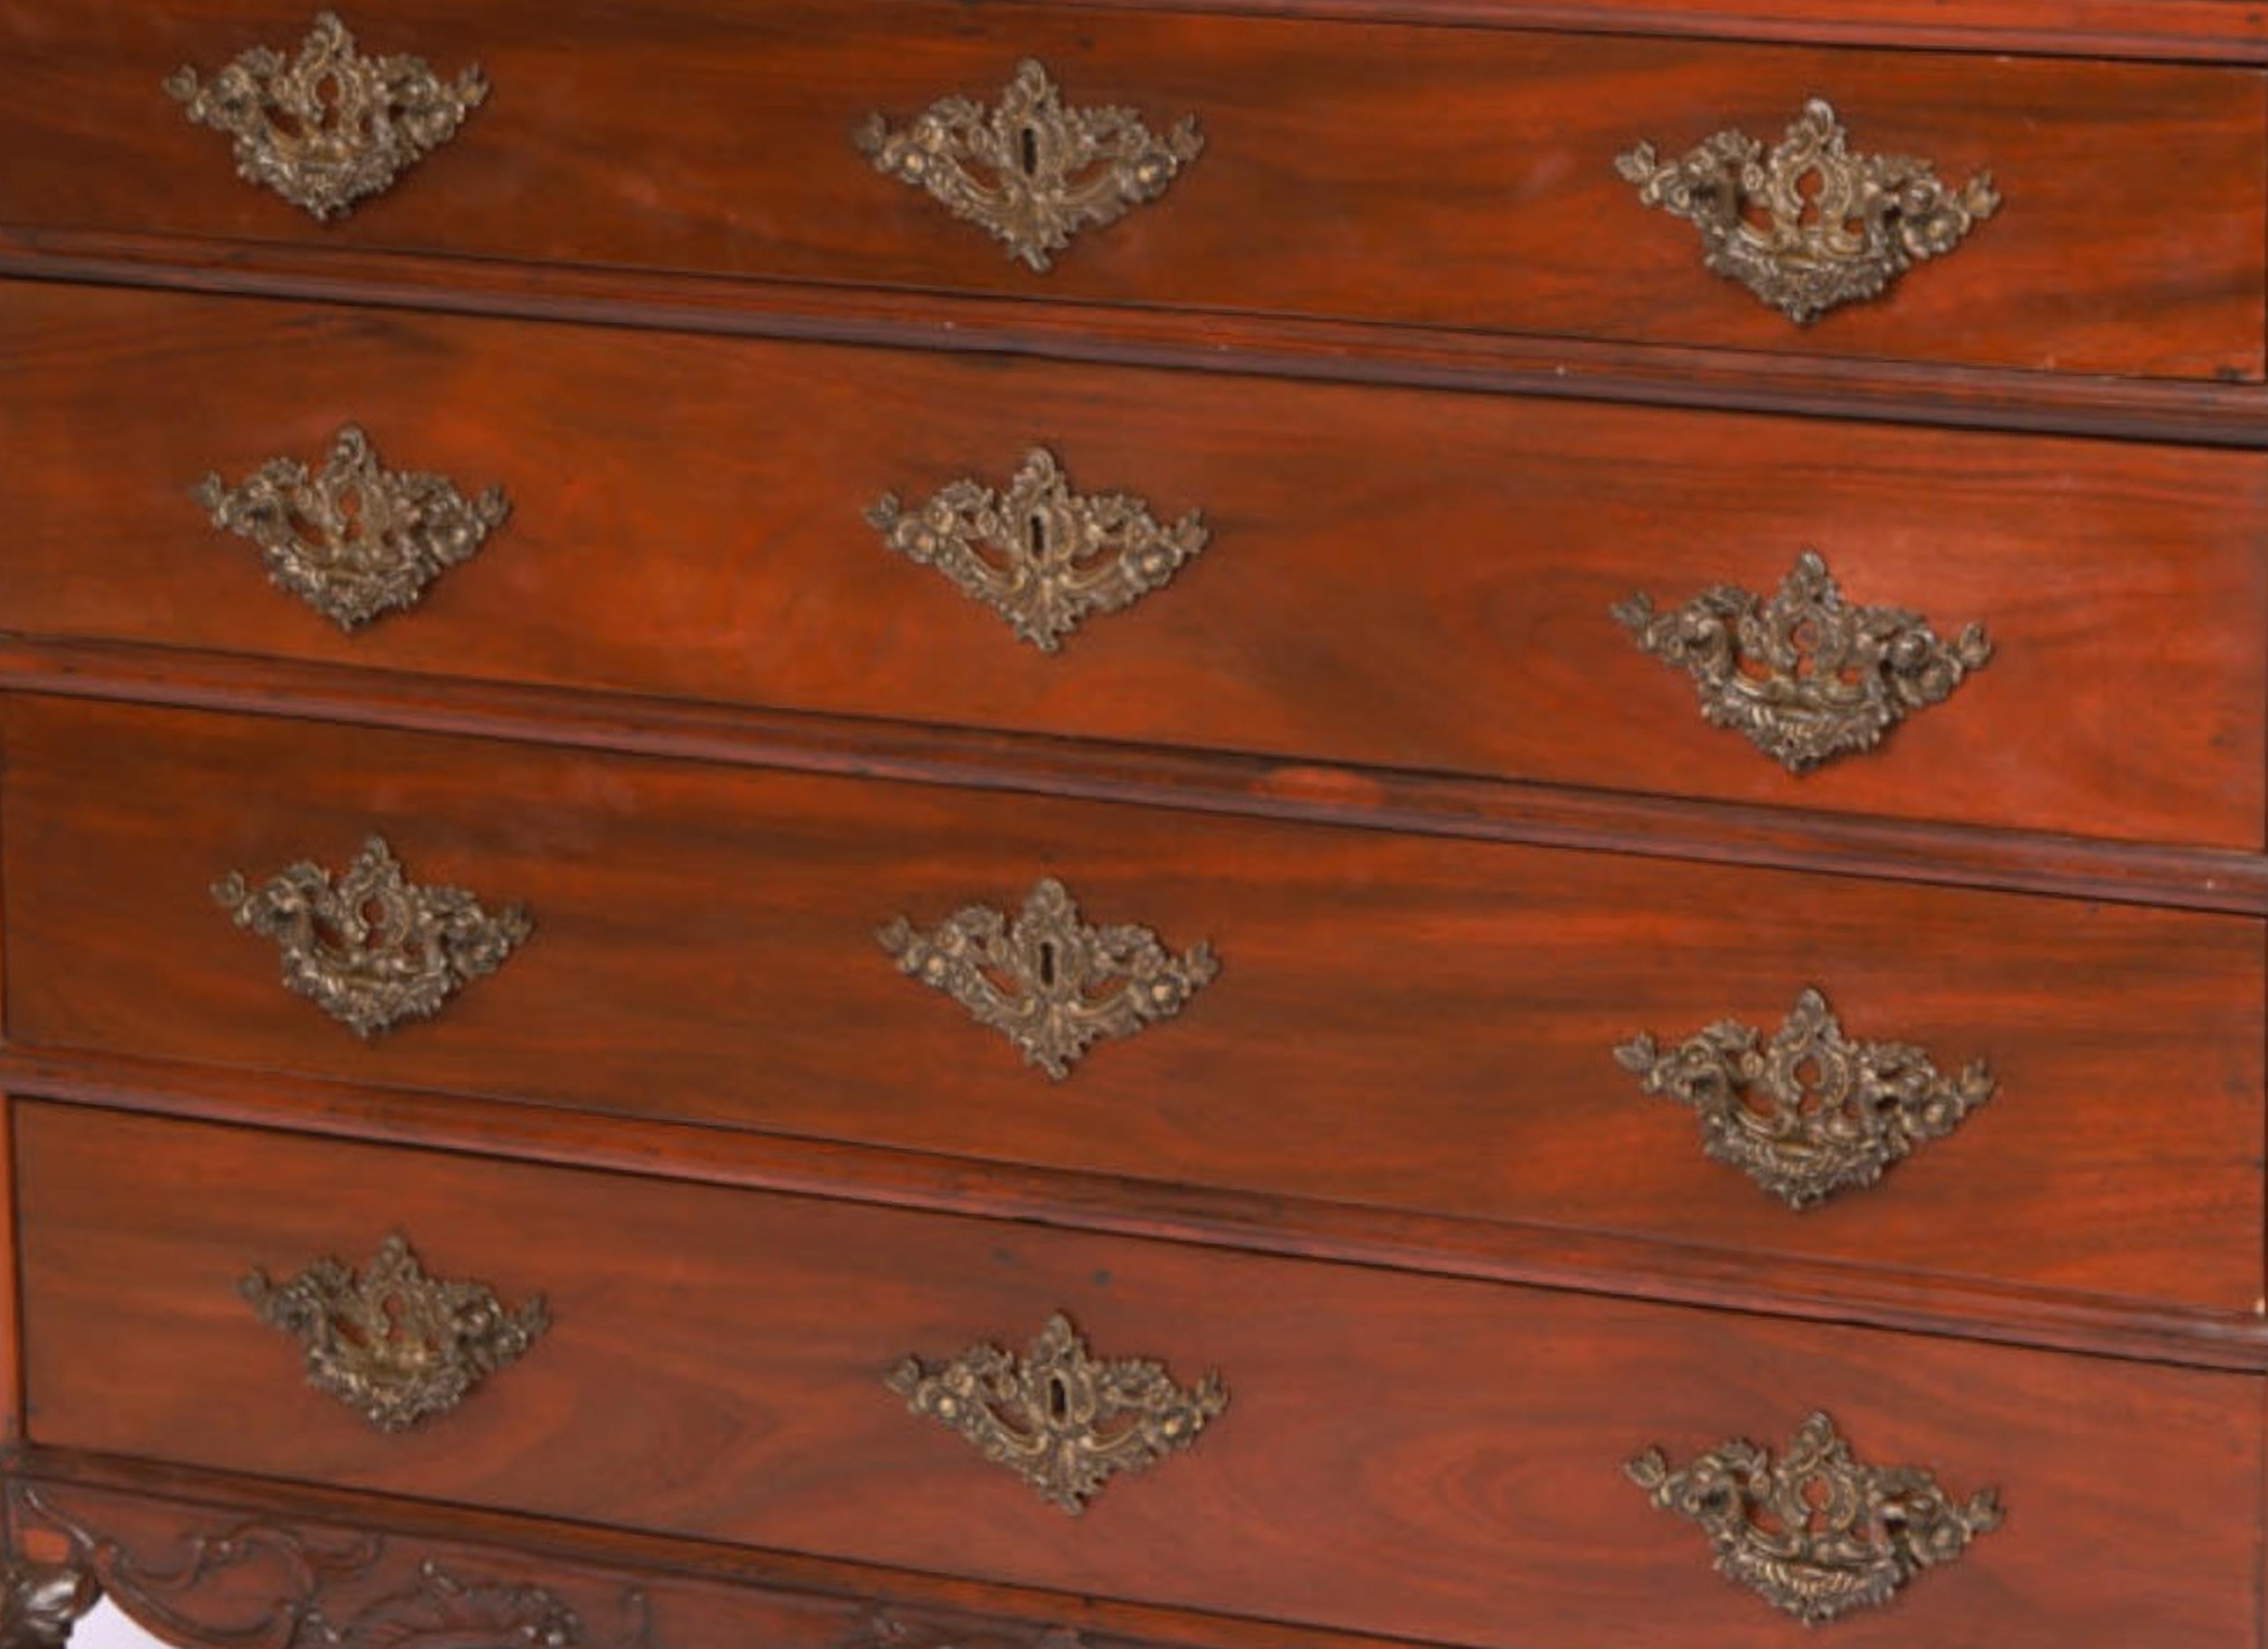 Hand-Crafted Important Portuguese Commode 19th Century